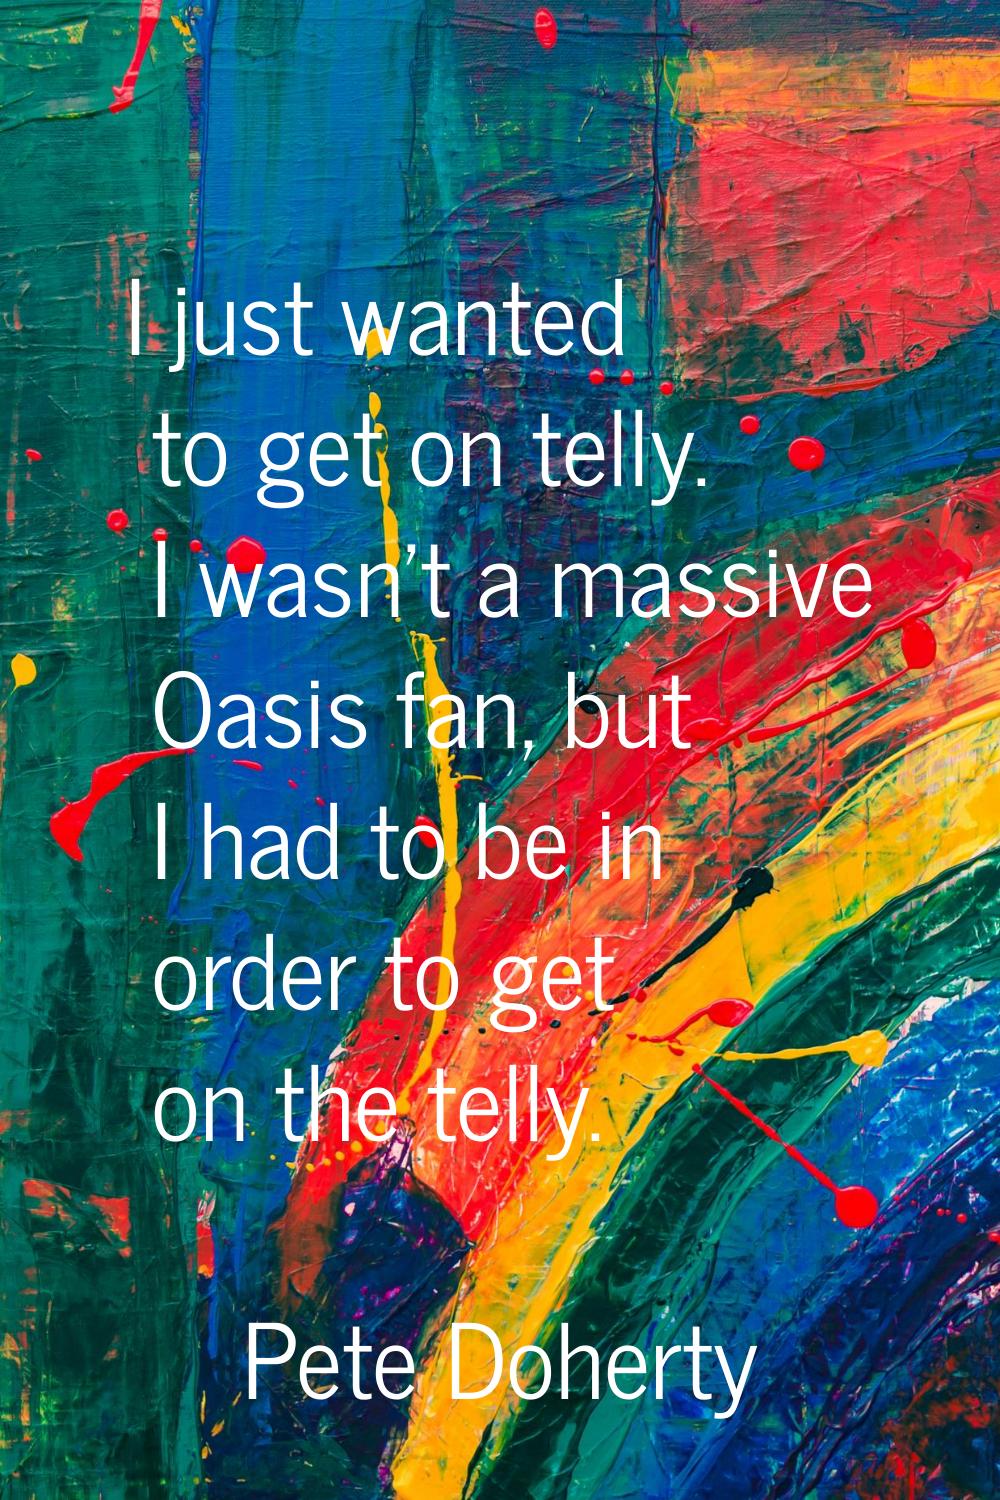 I just wanted to get on telly. I wasn't a massive Oasis fan, but I had to be in order to get on the